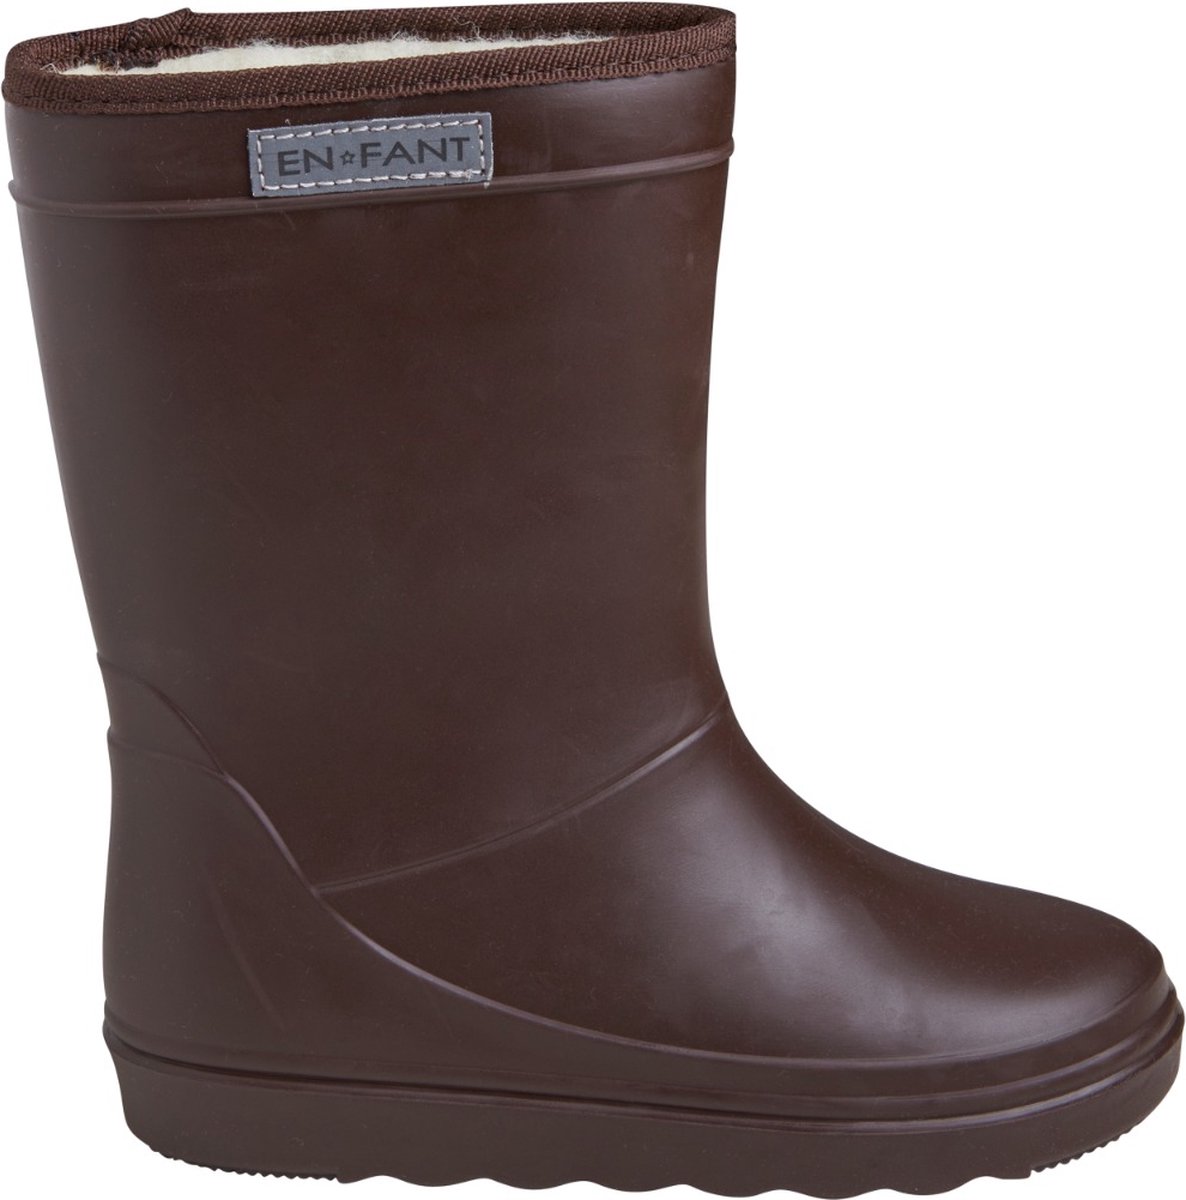 ENFANT THERMOBOOTS COFFEE BEAN-29